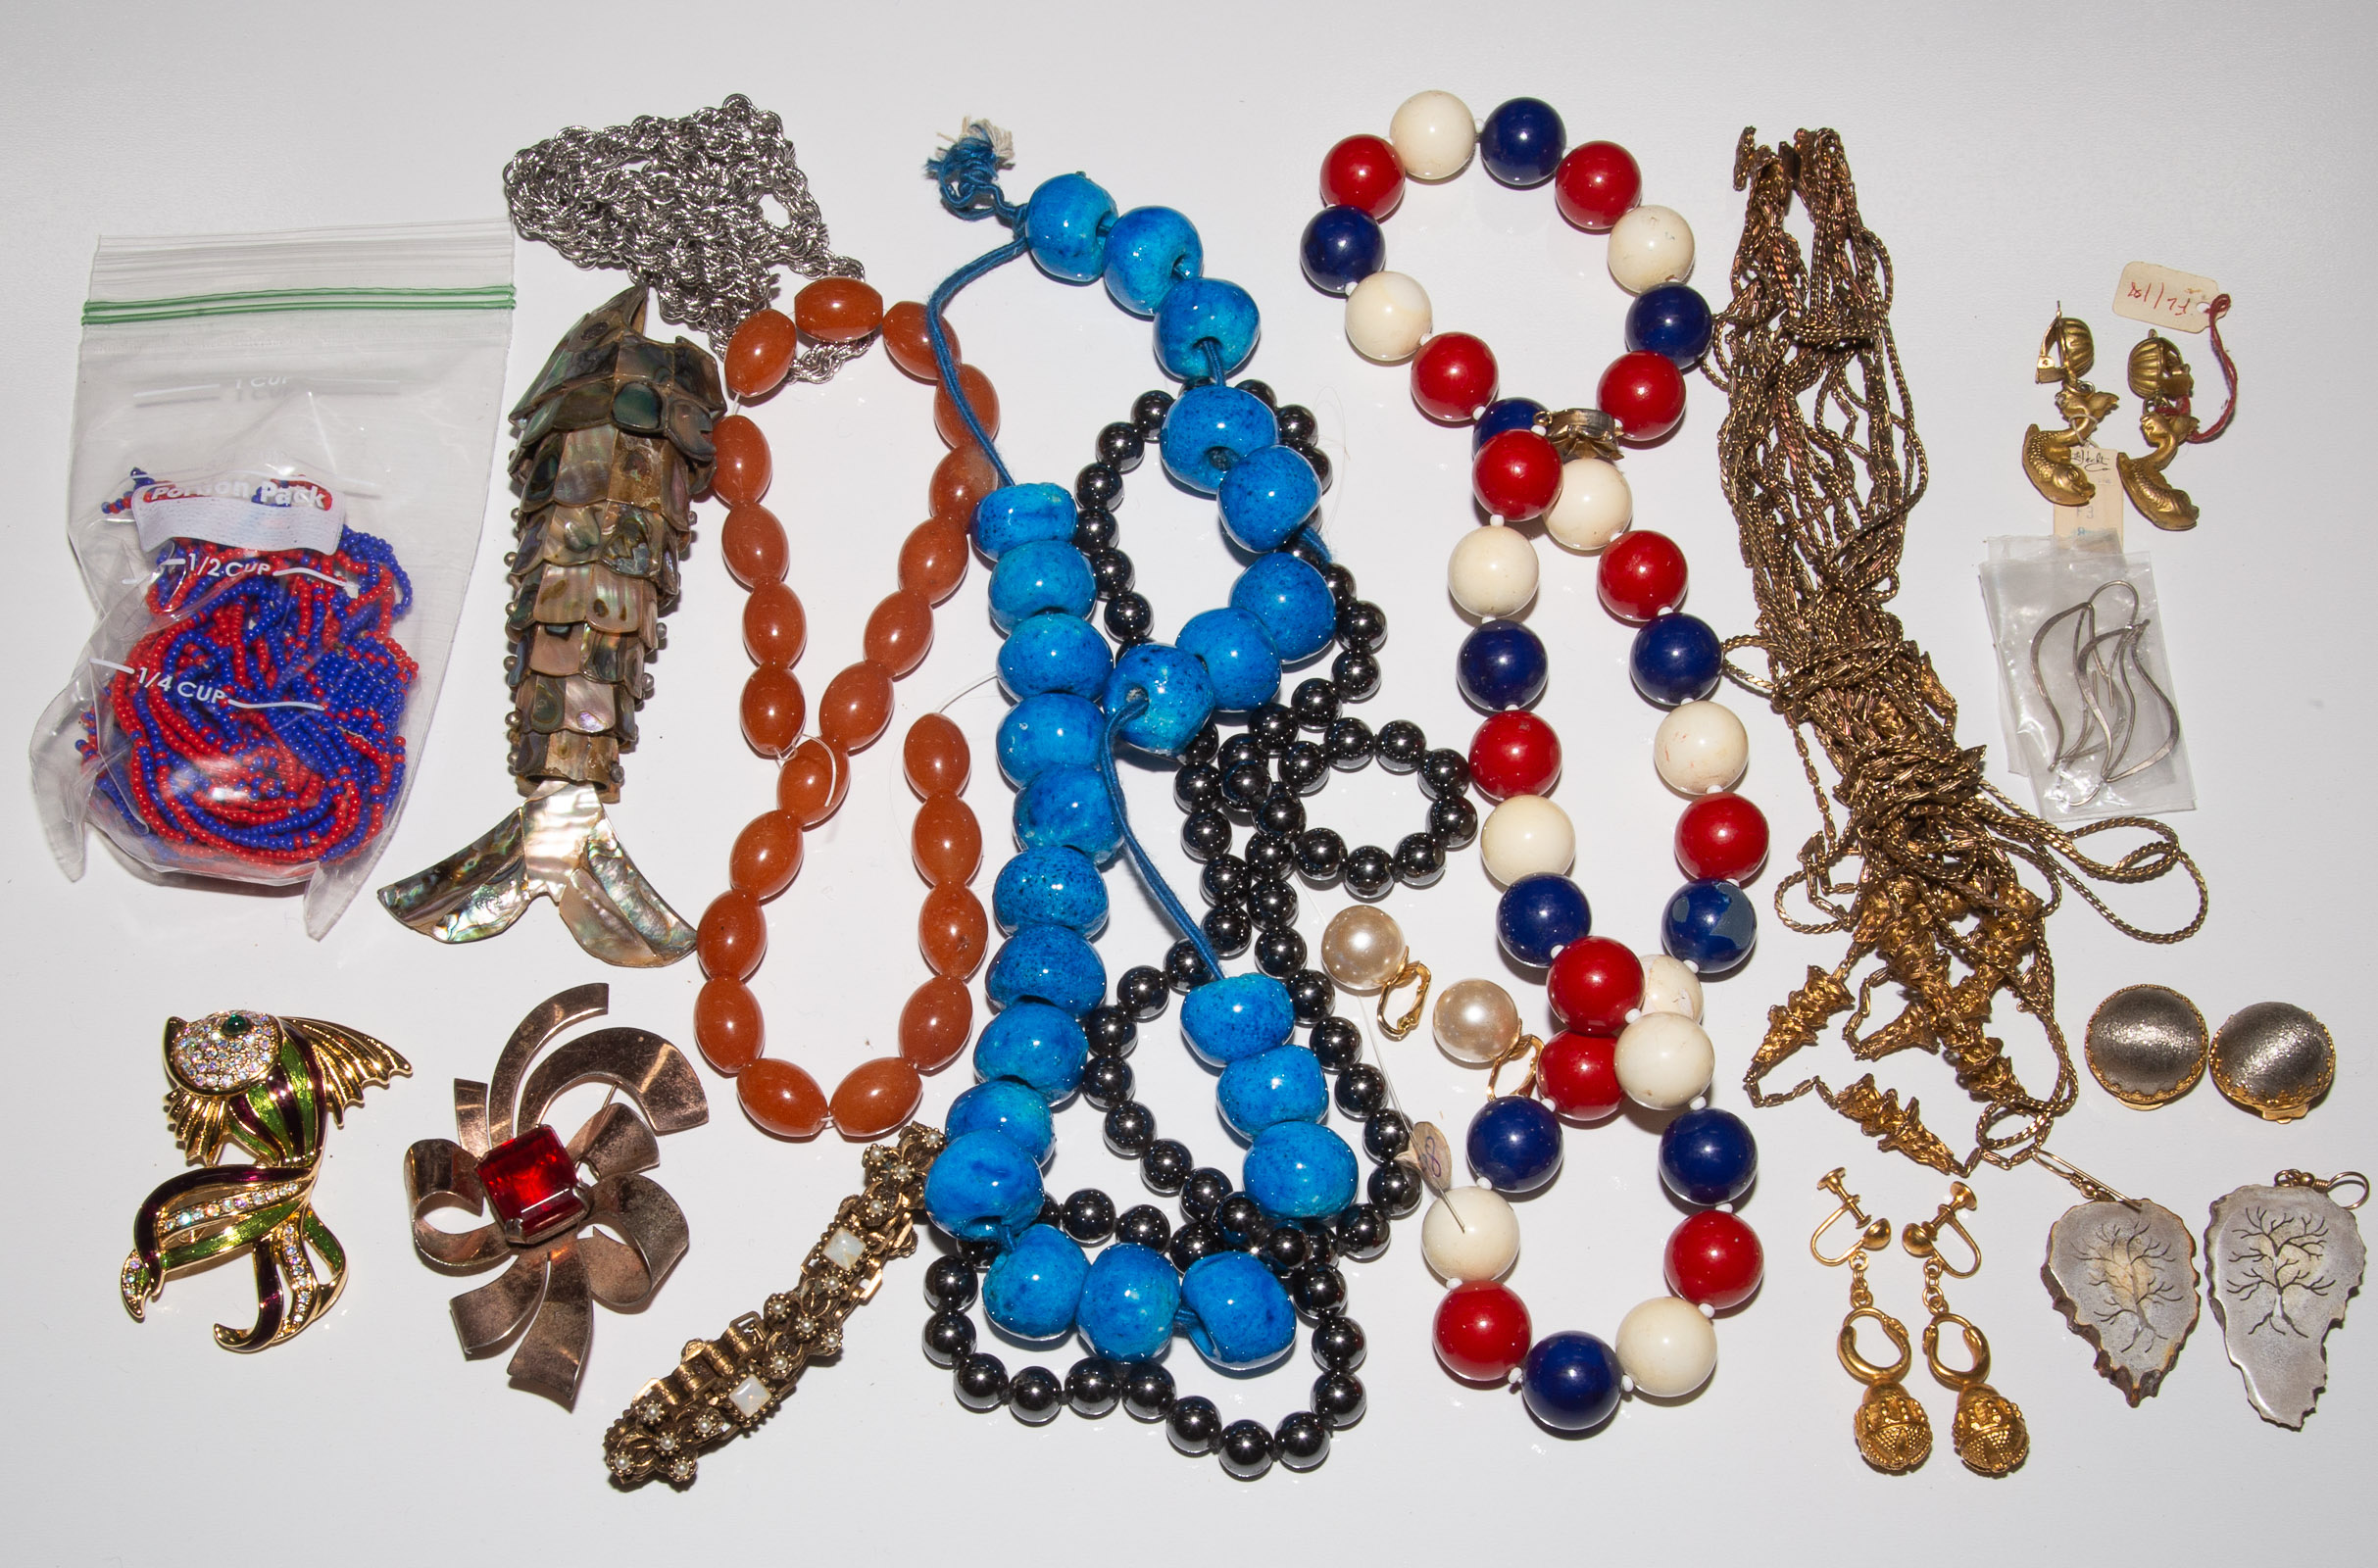 A COLLECTION OF VINTAGE JEWELRY Includes